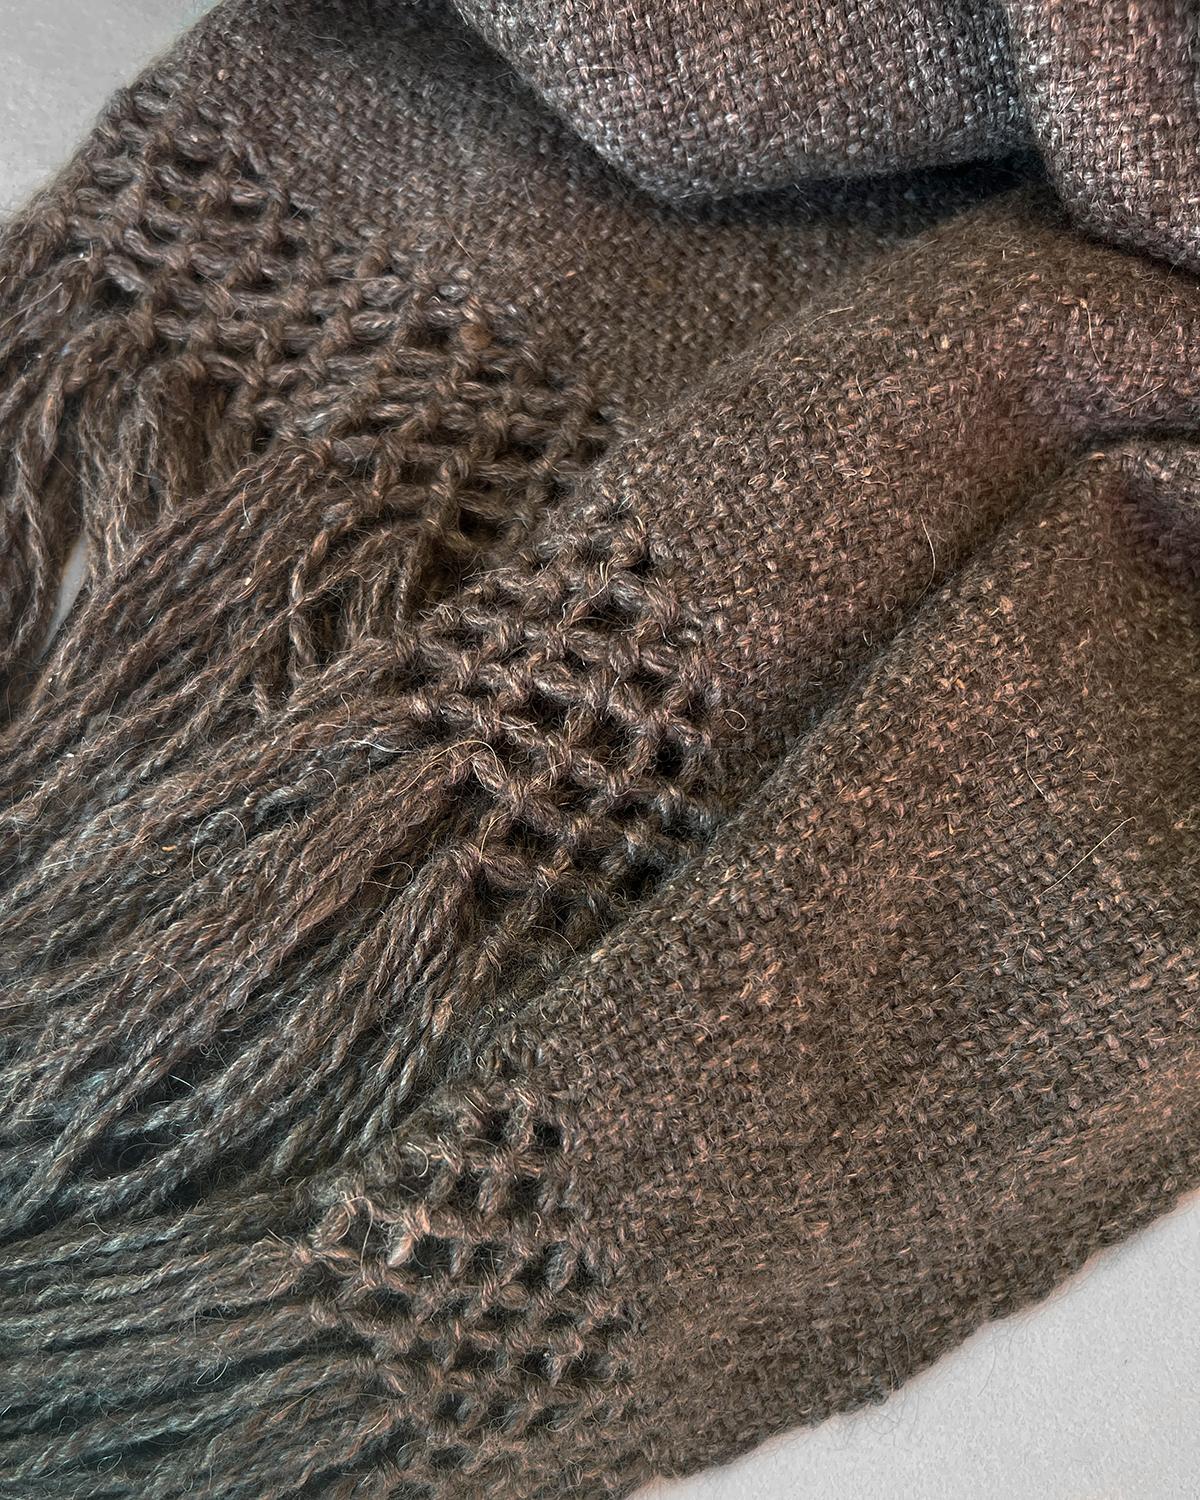 Hand-Woven Handwoven Llama Wool Throw in Dark Brown Made in Argentina, In Stock